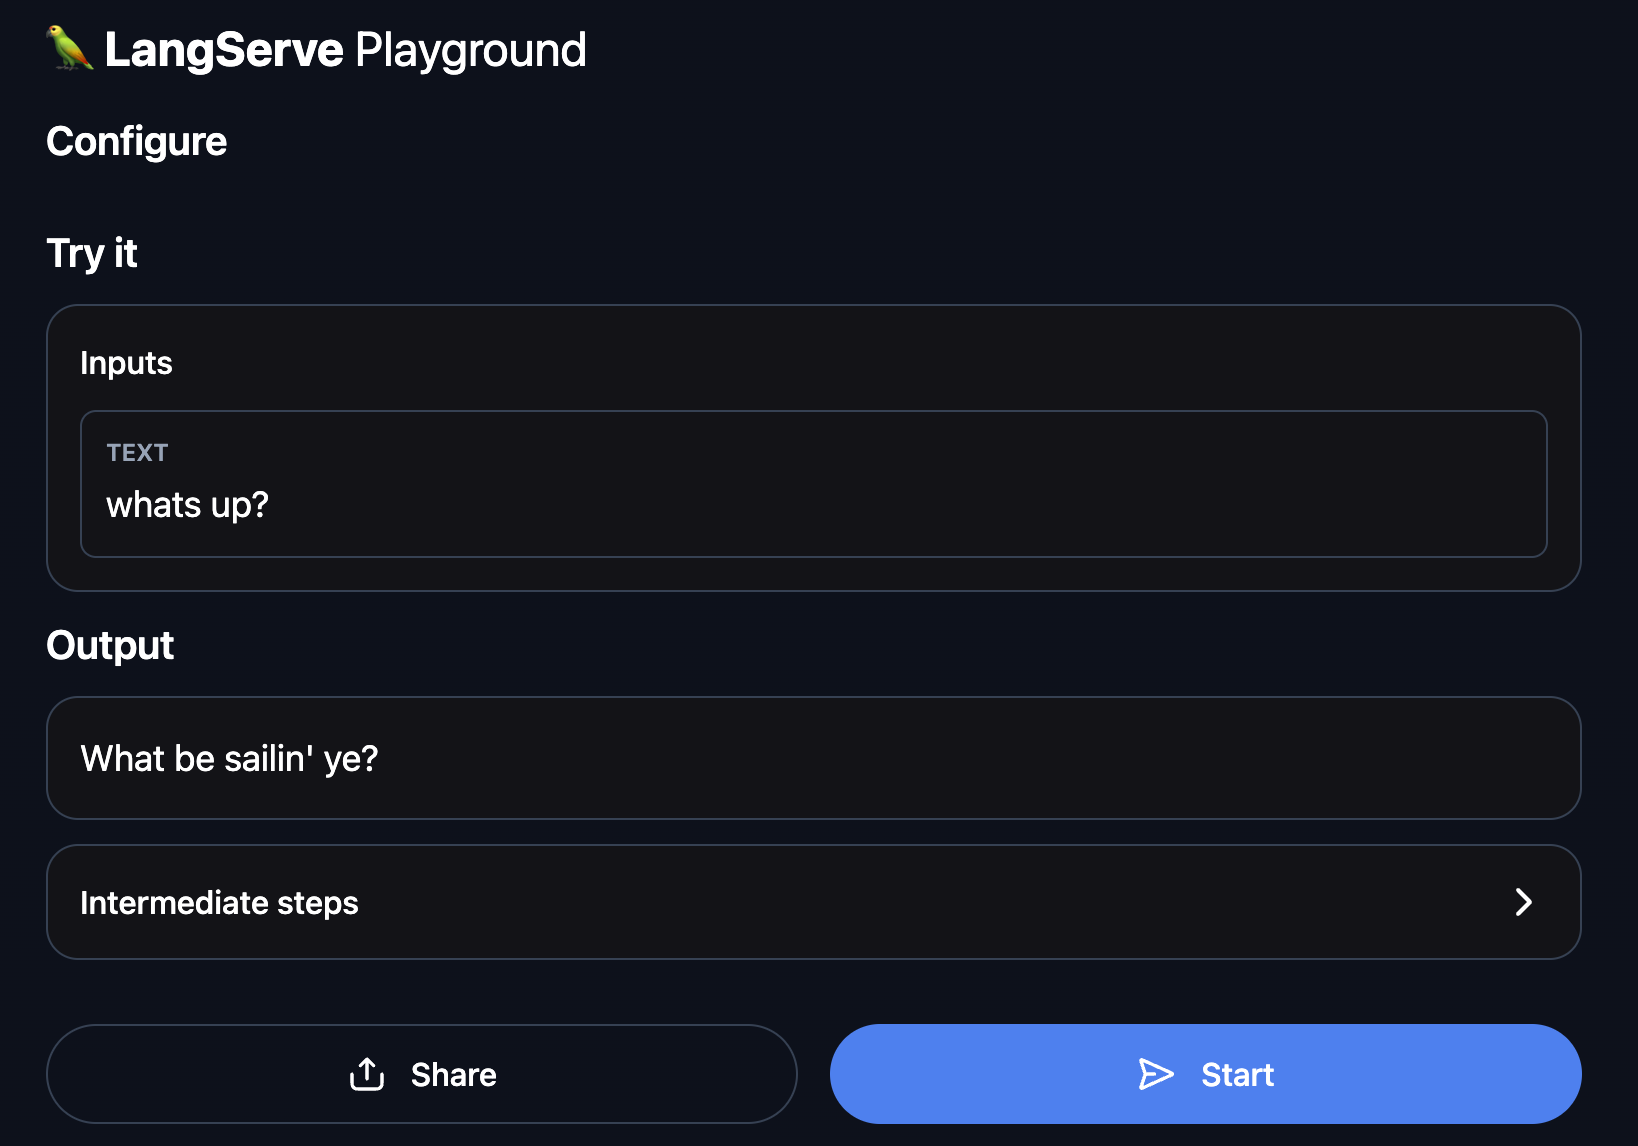 Screenshot of the LangServe Playground interface with input and output fields demonstrating pirate speak conversion.